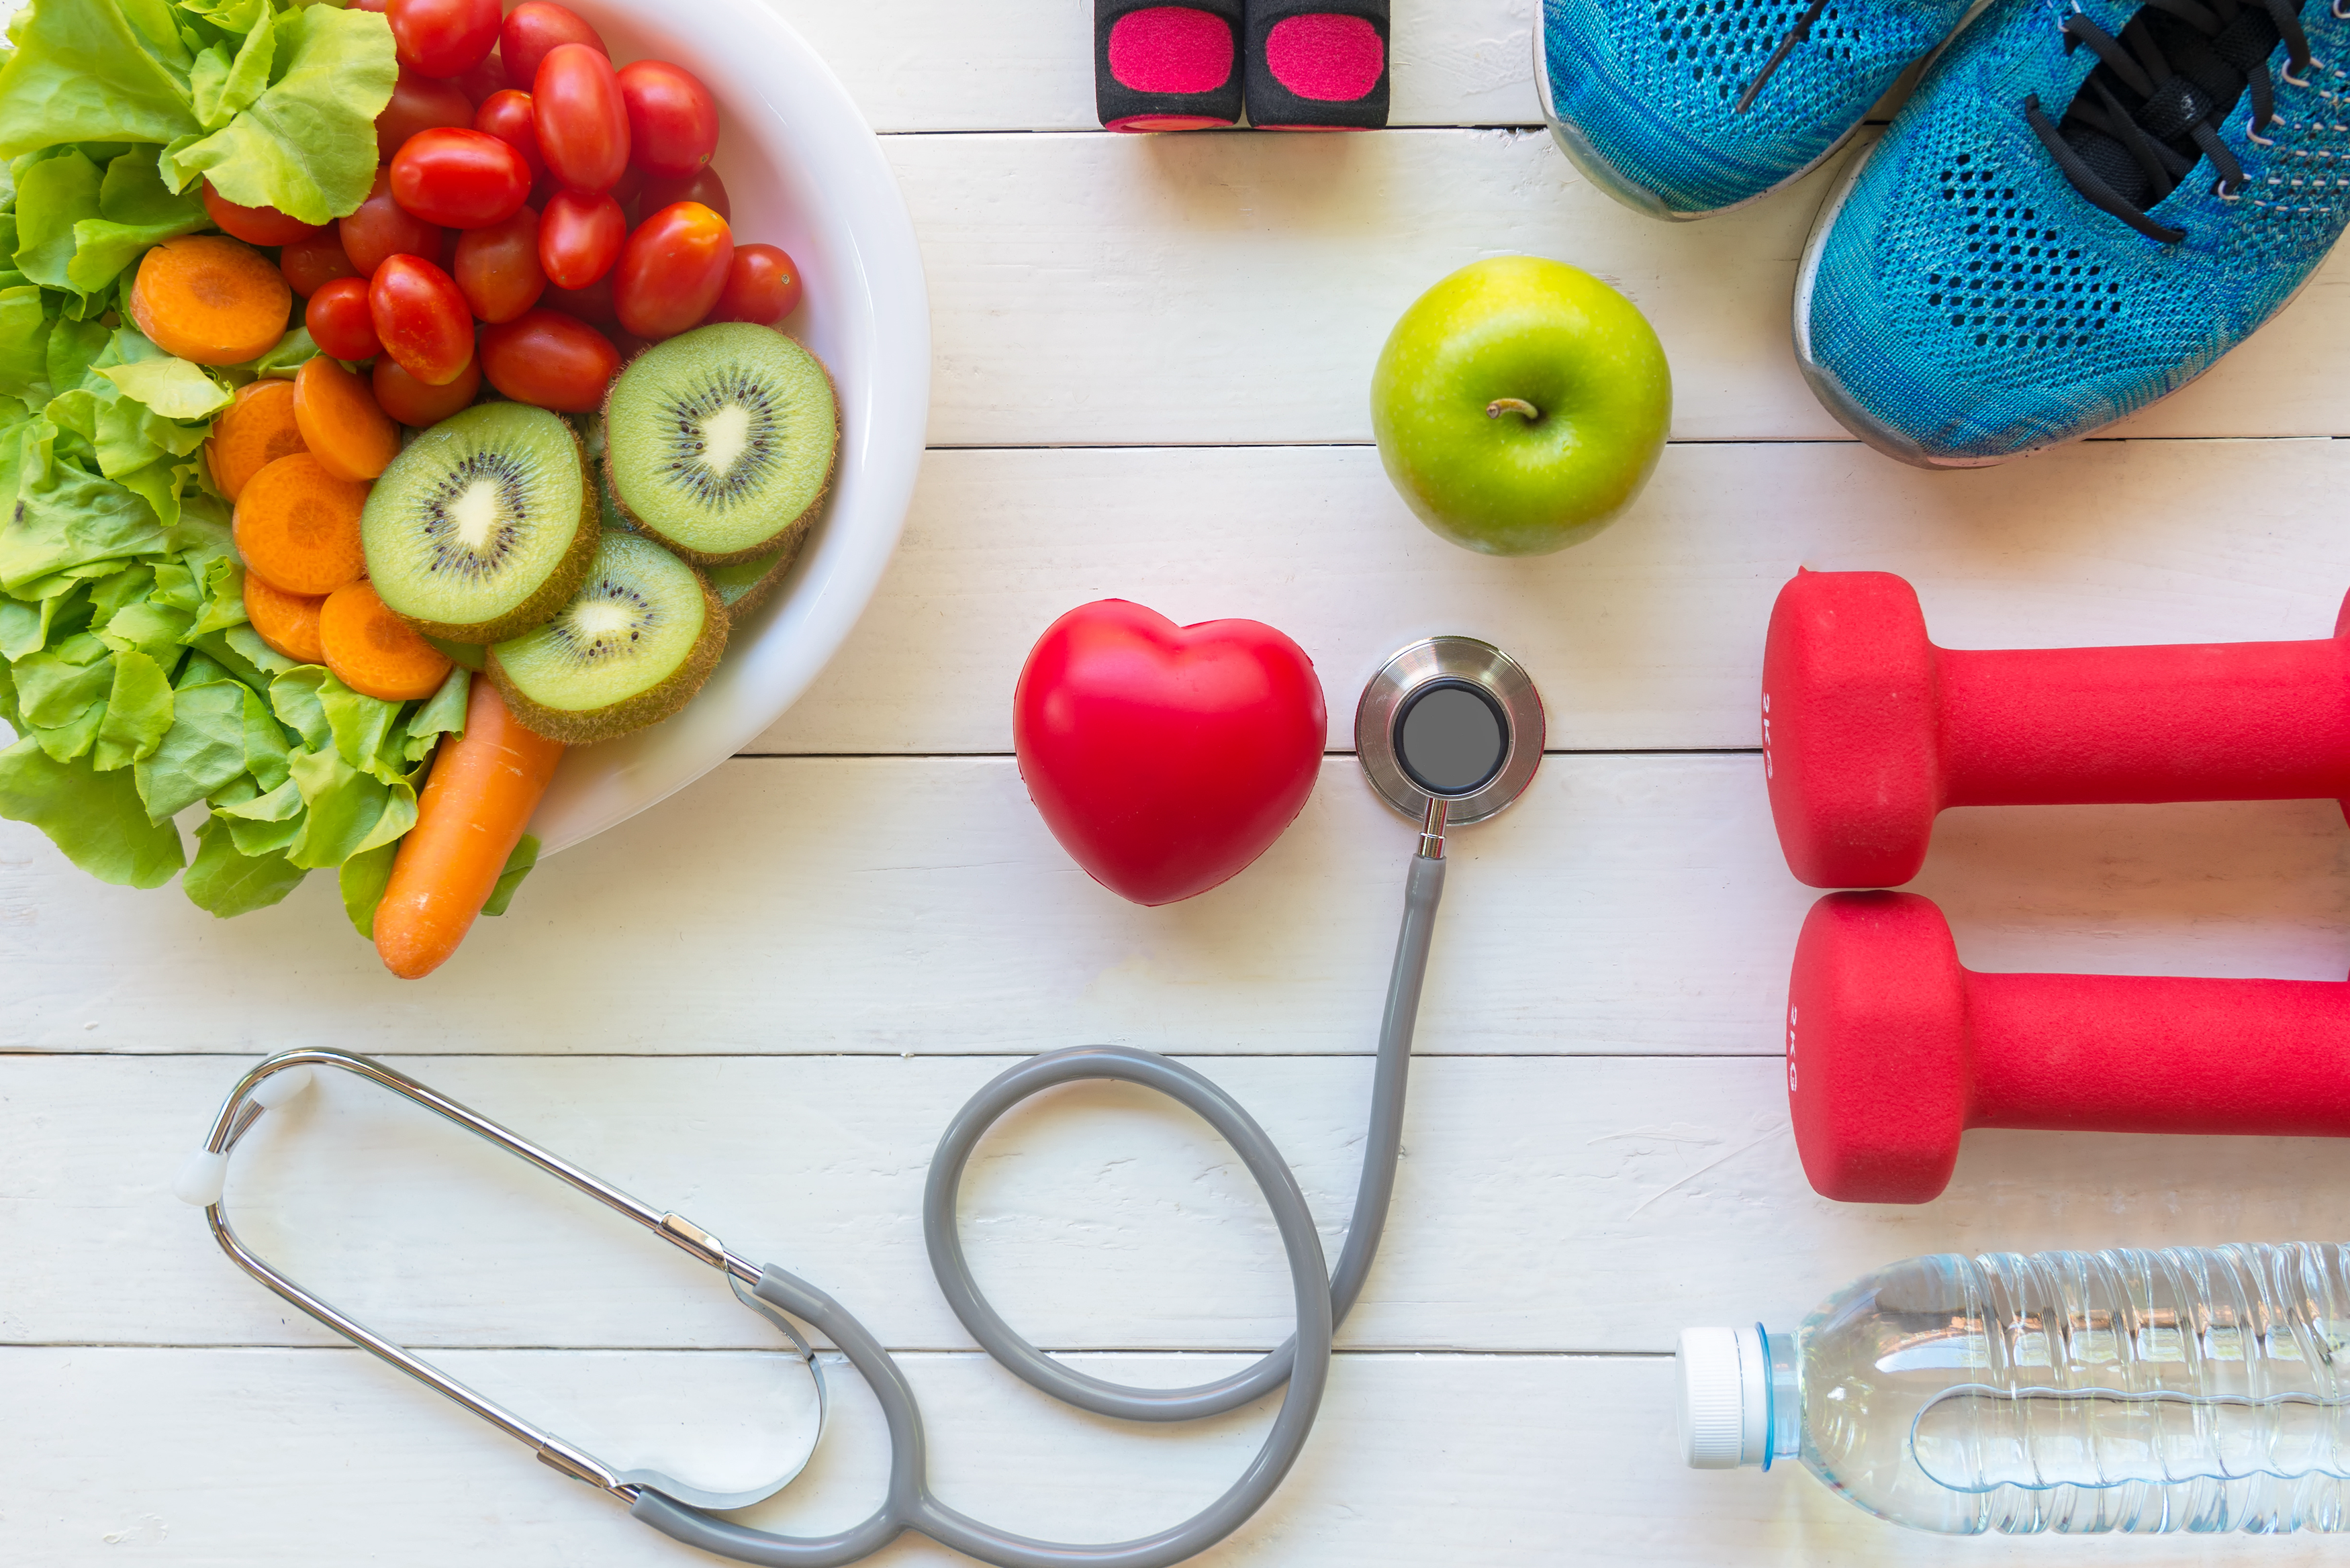 Stethoscope surrounded by vegetables and athletic weights